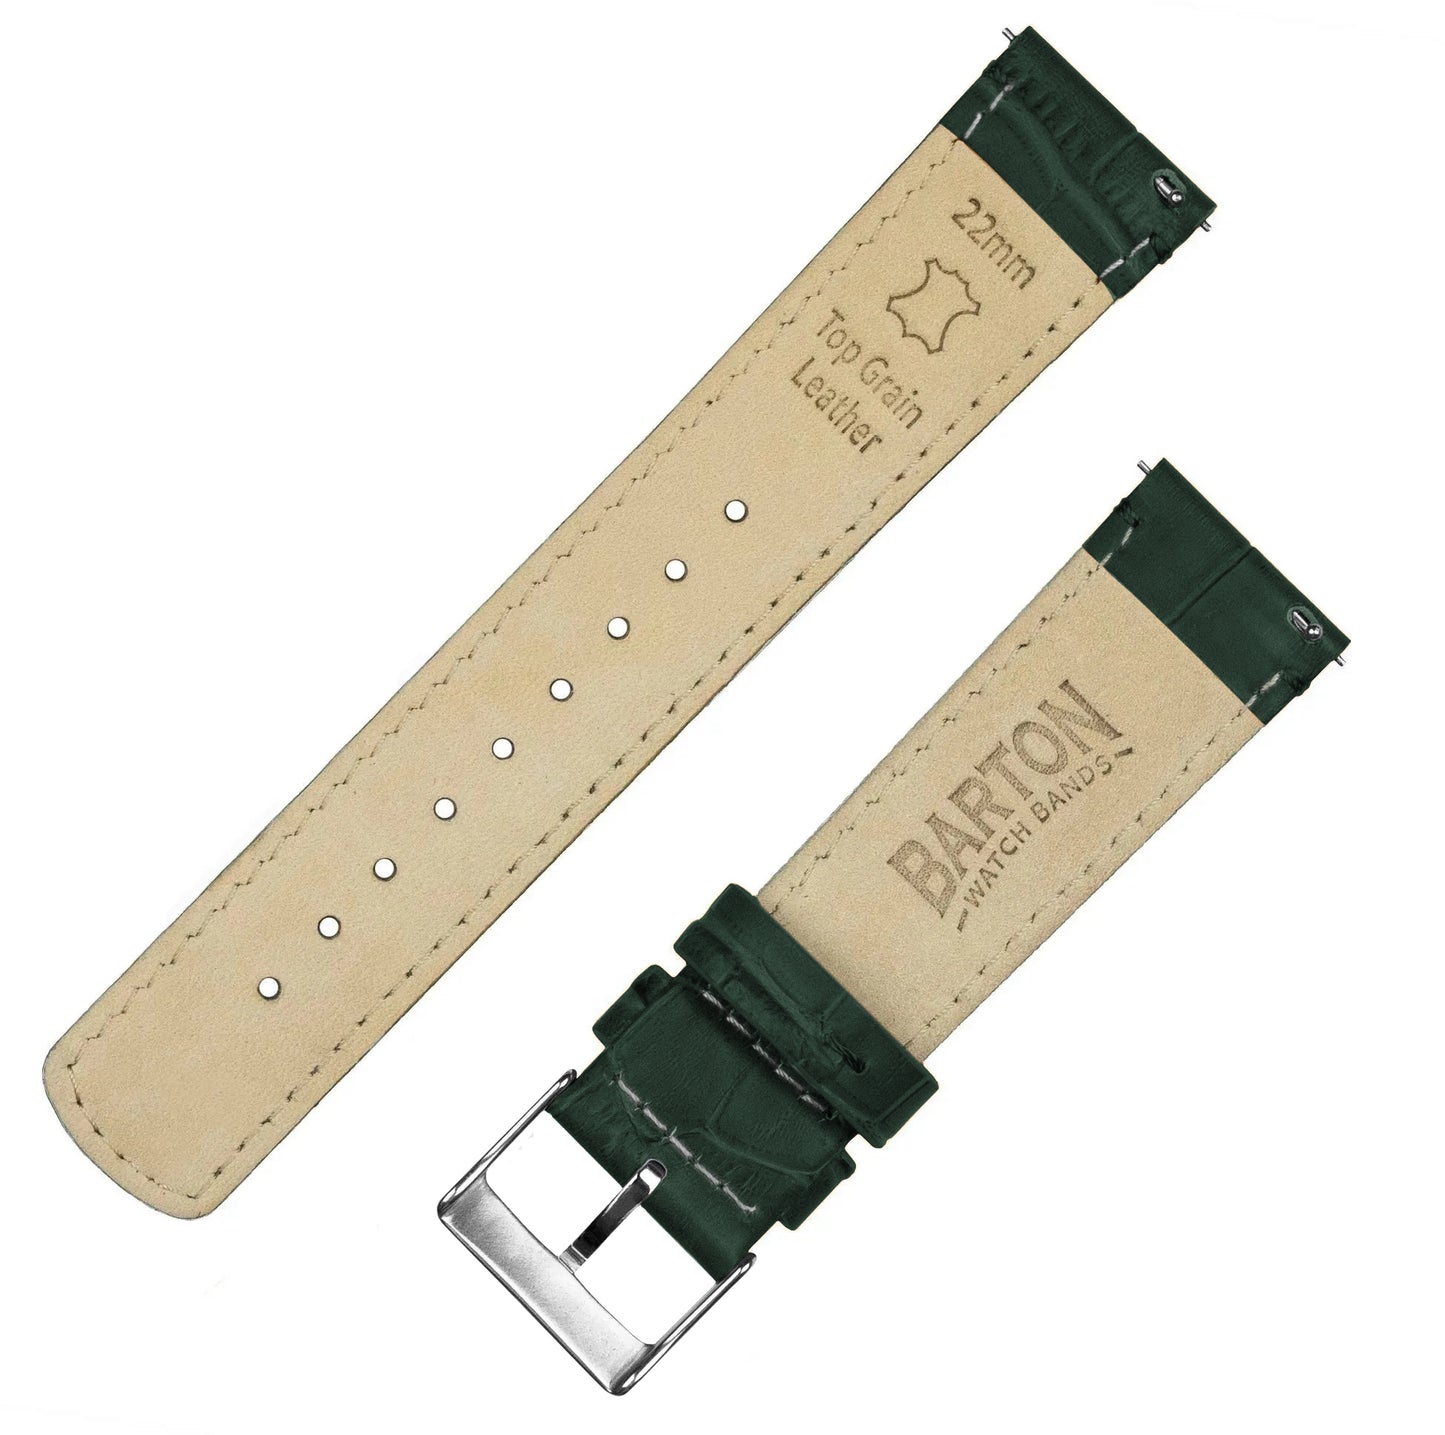 Fossil Sport | Forest Green Alligator Grain Leather - Barton Watch Bands